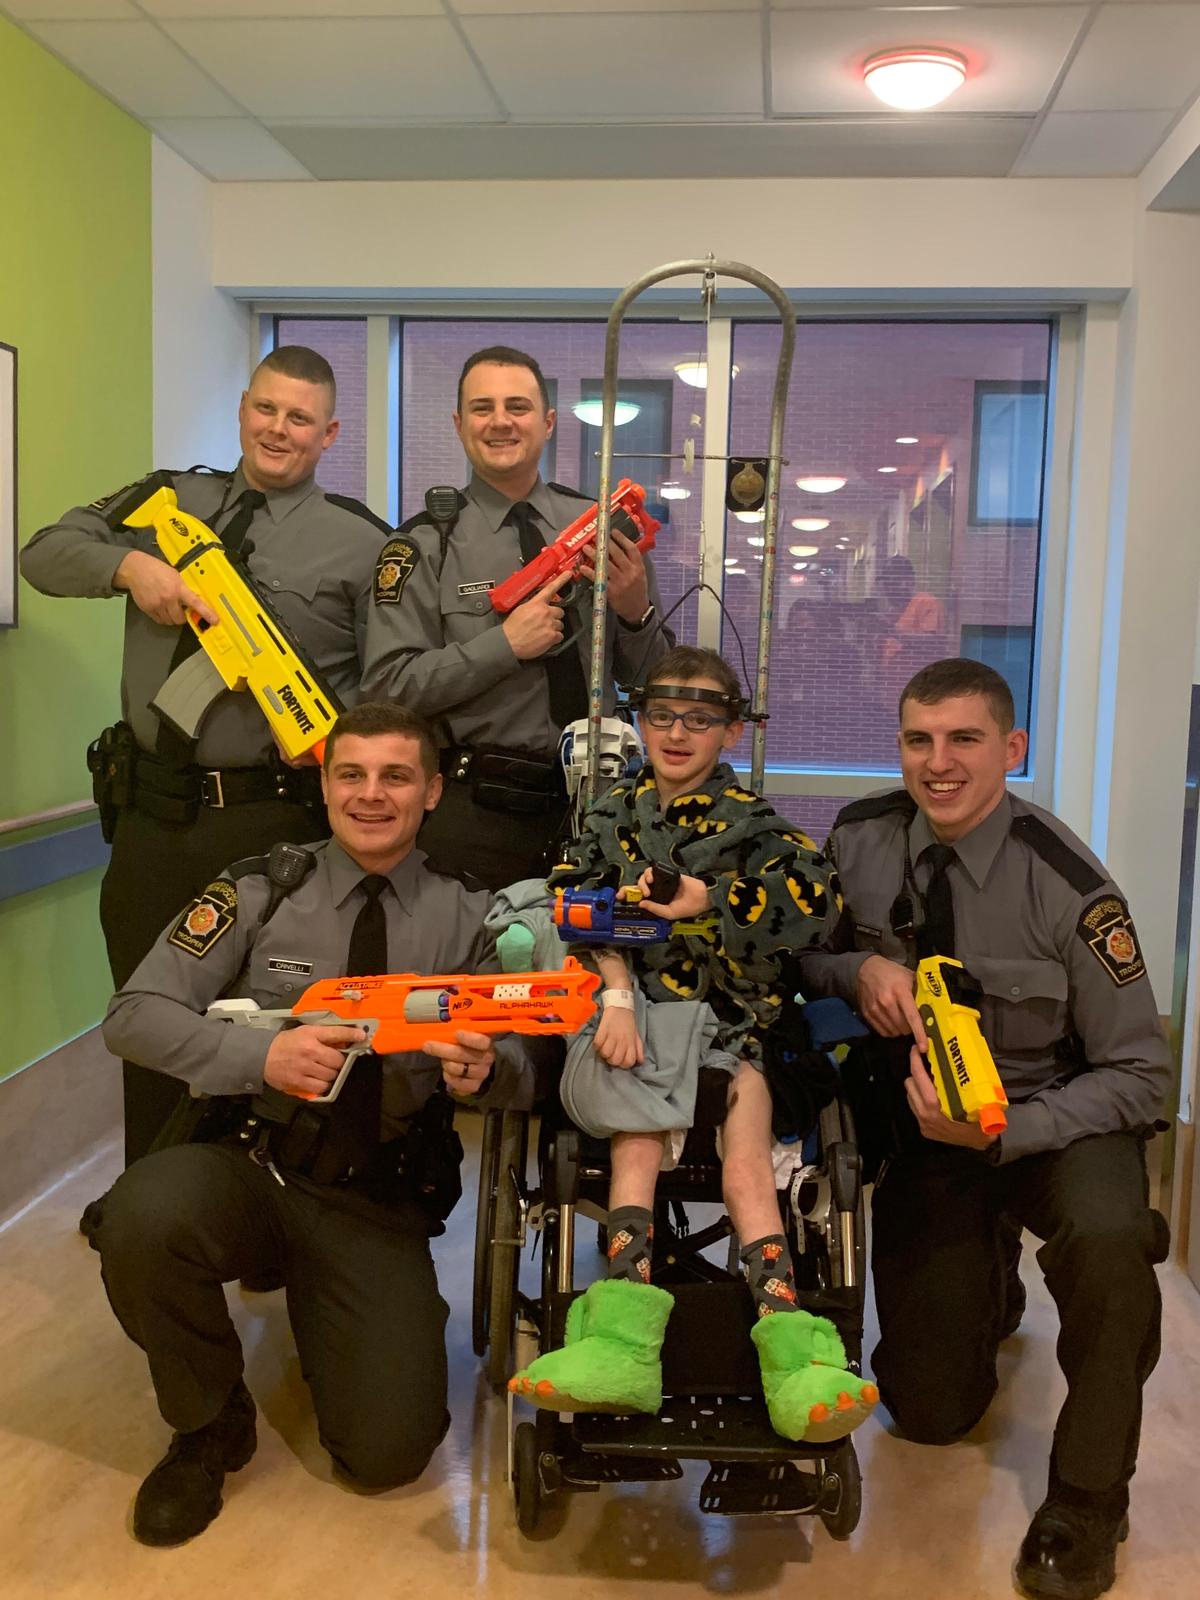 Josh with police officers when he was in the children's hospital in Pittsburgh for his scoliosis surgery. The officers often use to come and spend quality fun time with him. (Courtesy of <a href="https://www.facebook.com/rebecca.bourassa.3">Rebecca Bourassa</a>)